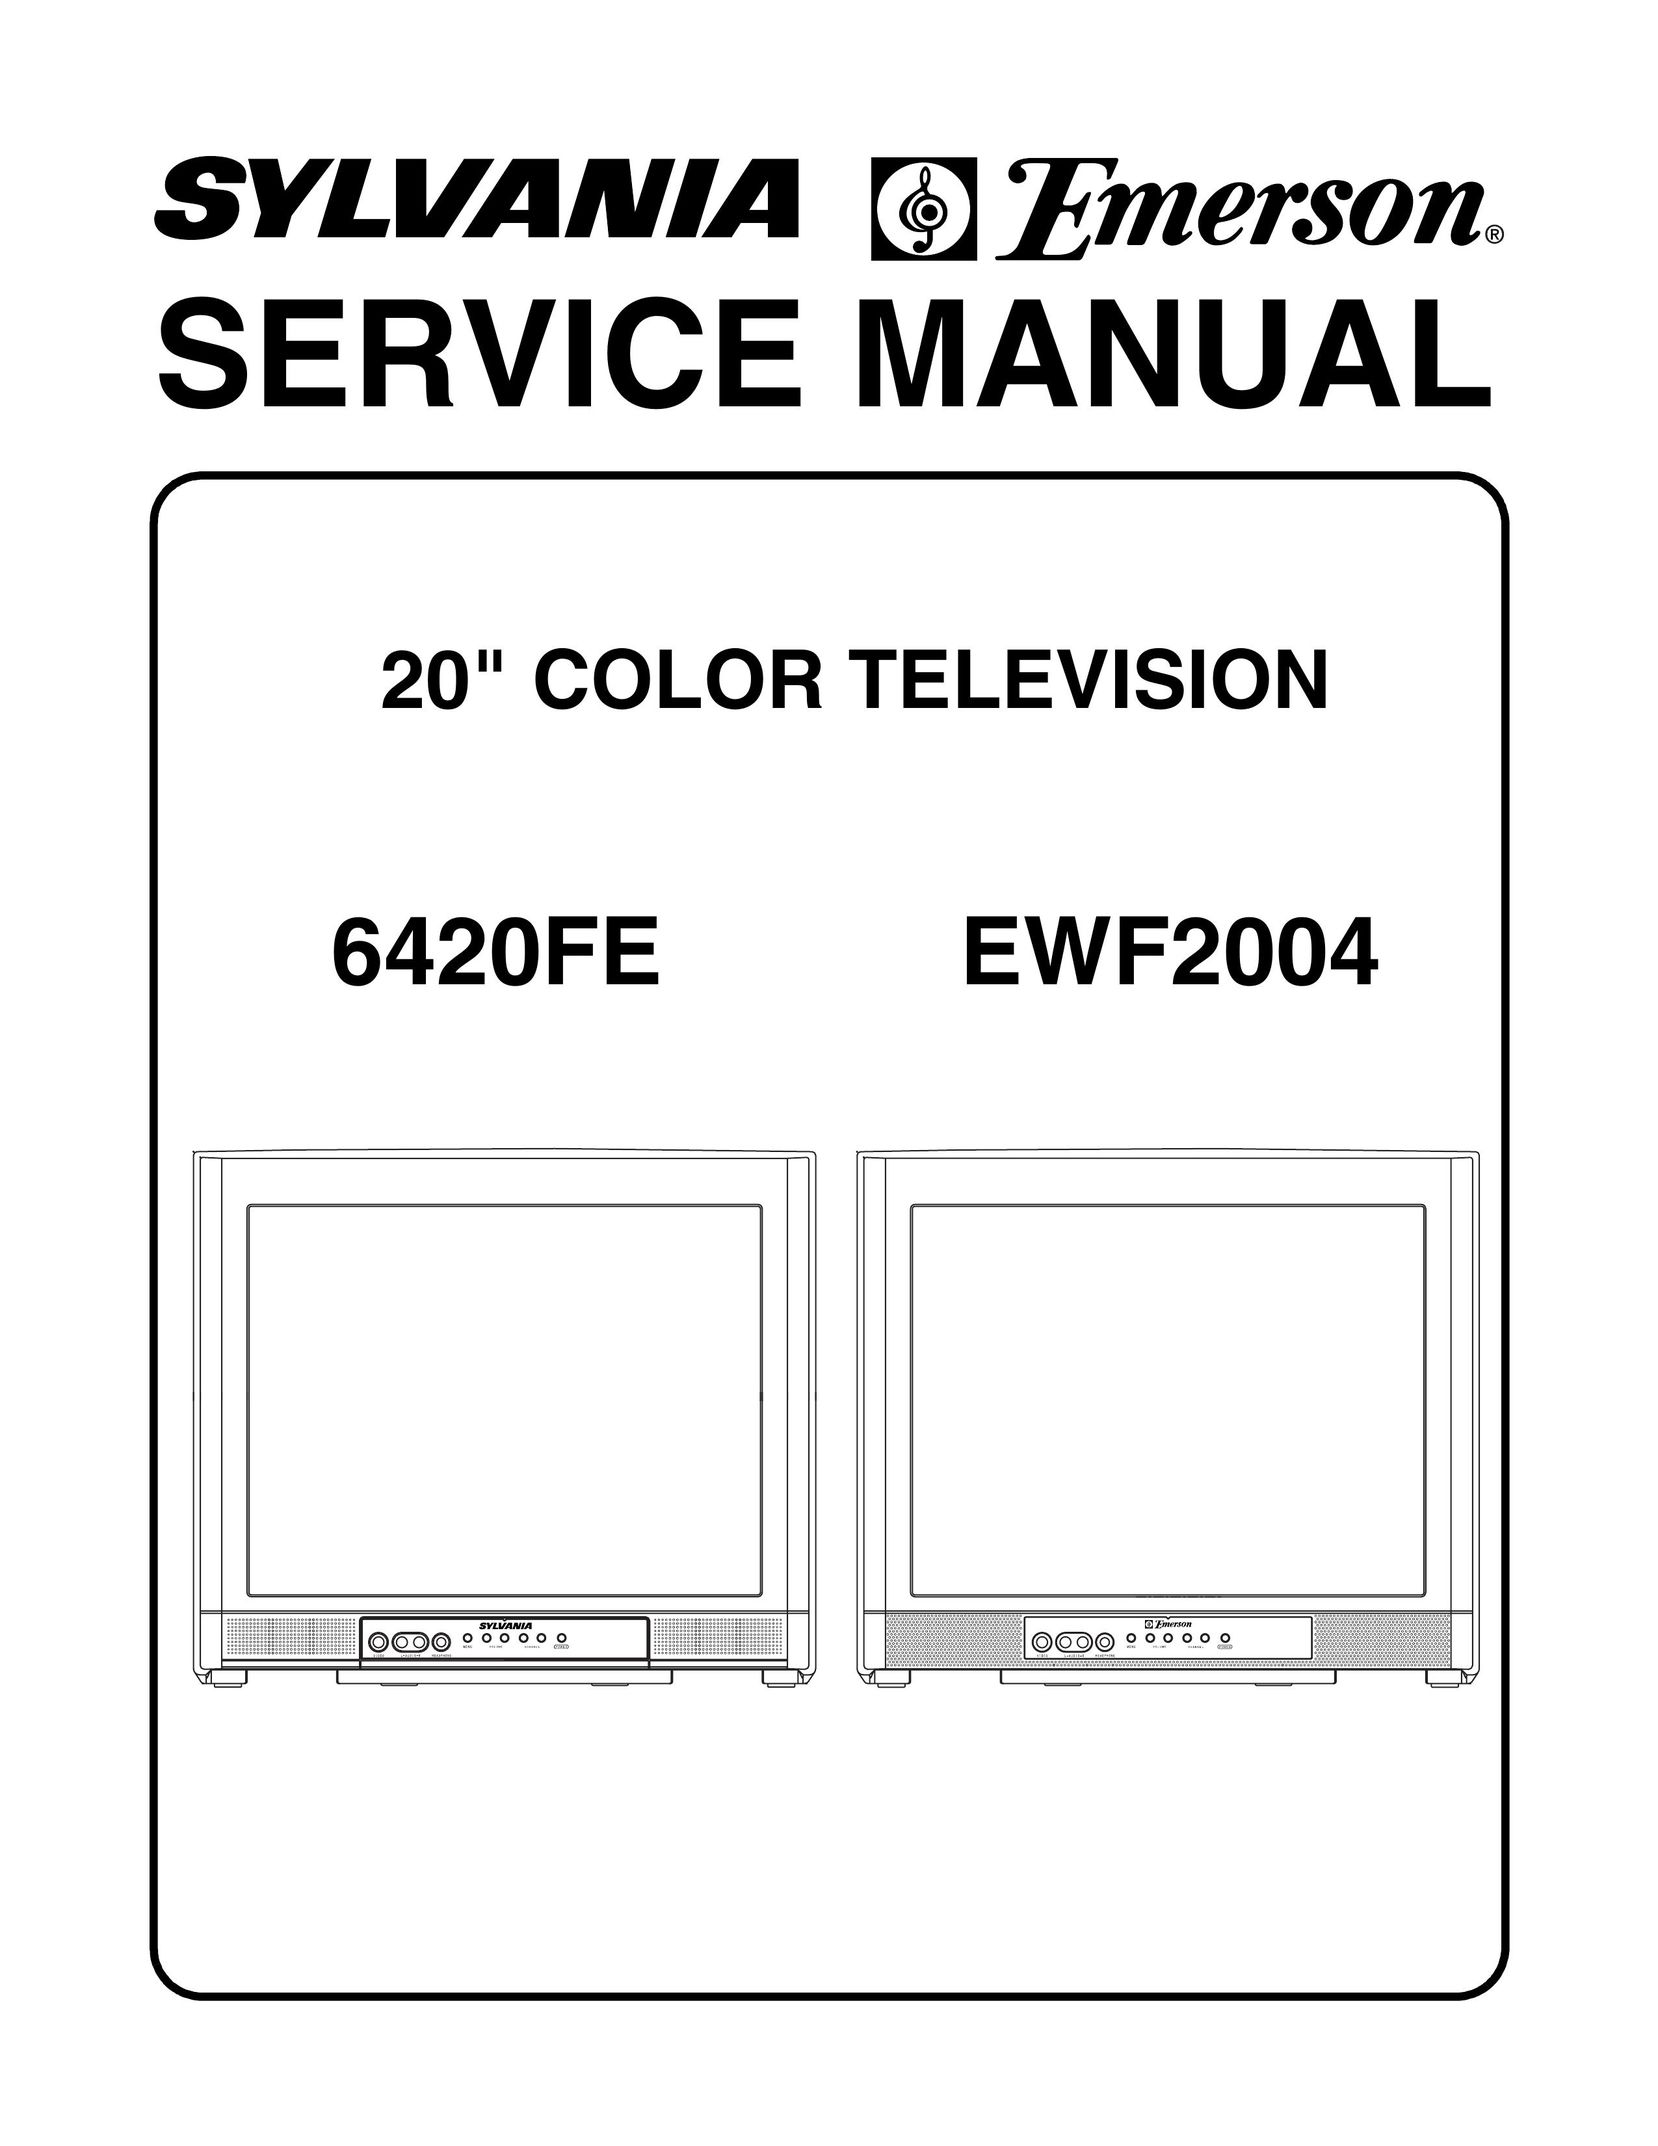 Emerson 6420FE CRT Television User Manual